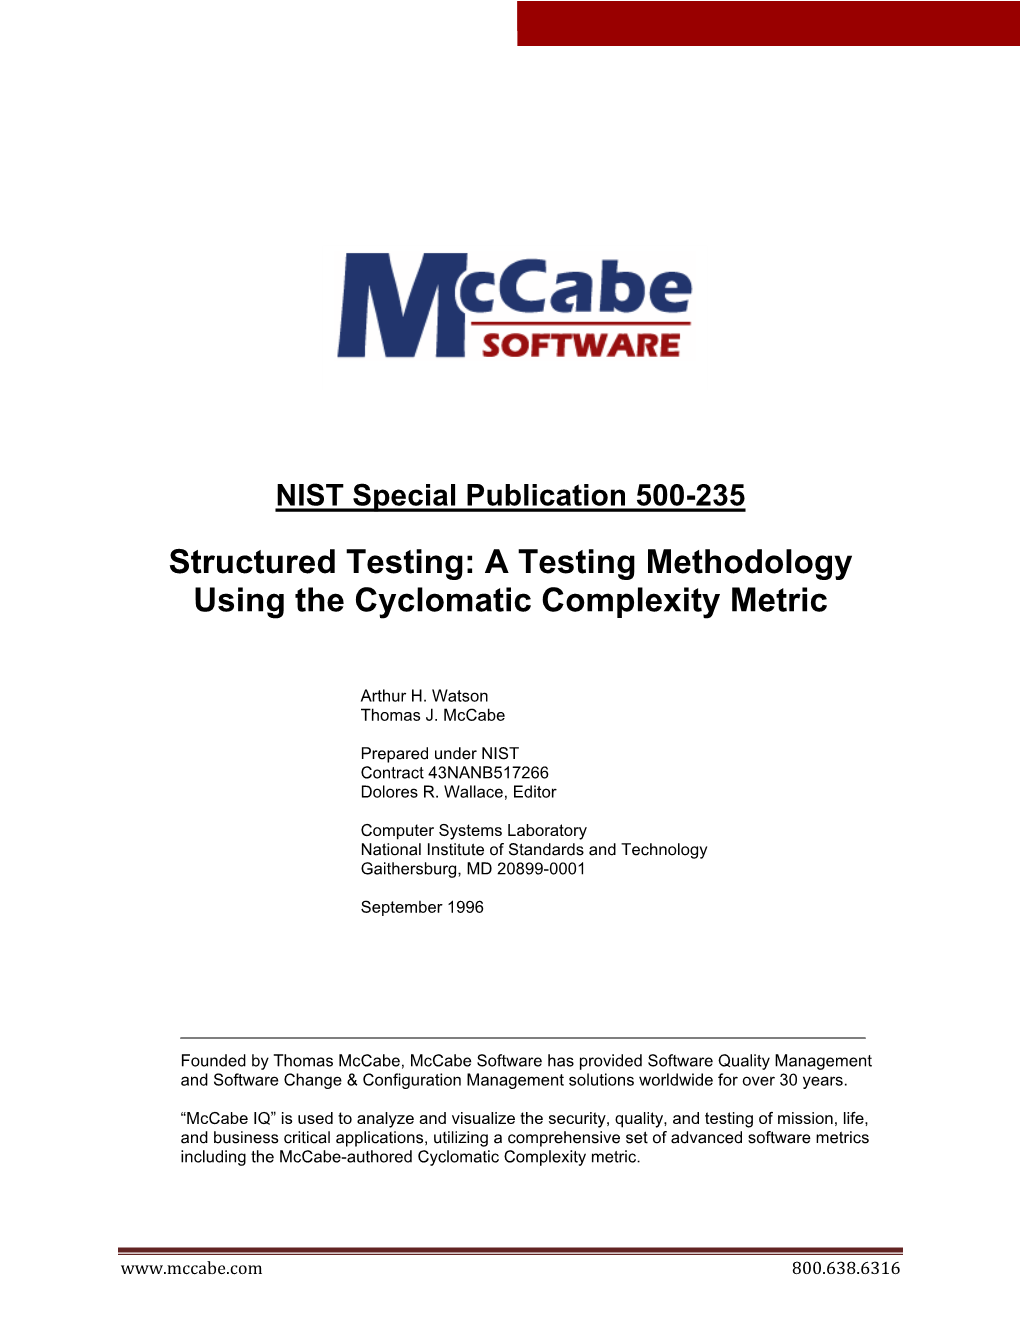 Structured Testing: a Testing Methodology Using the Cyclomatic Complexity Metric